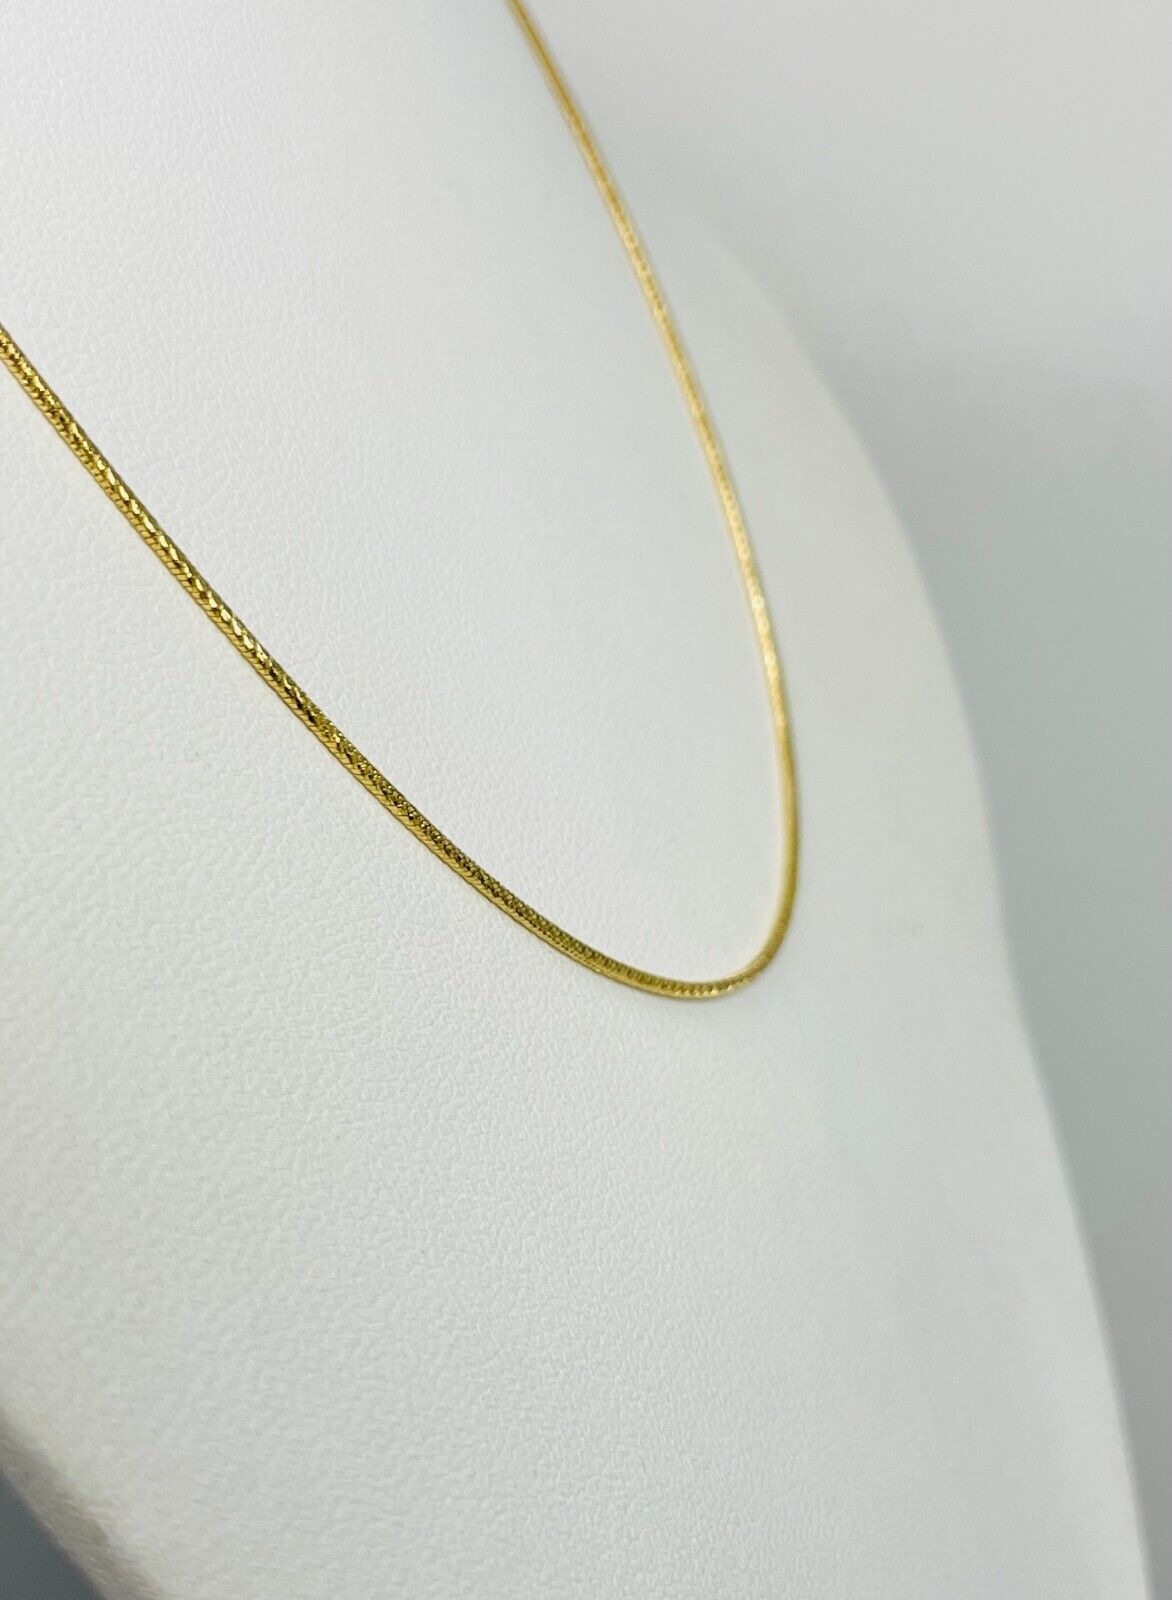 New! 16" 14k Solid Yellow Gold Diamond Cut Snake Chain Necklace Italy